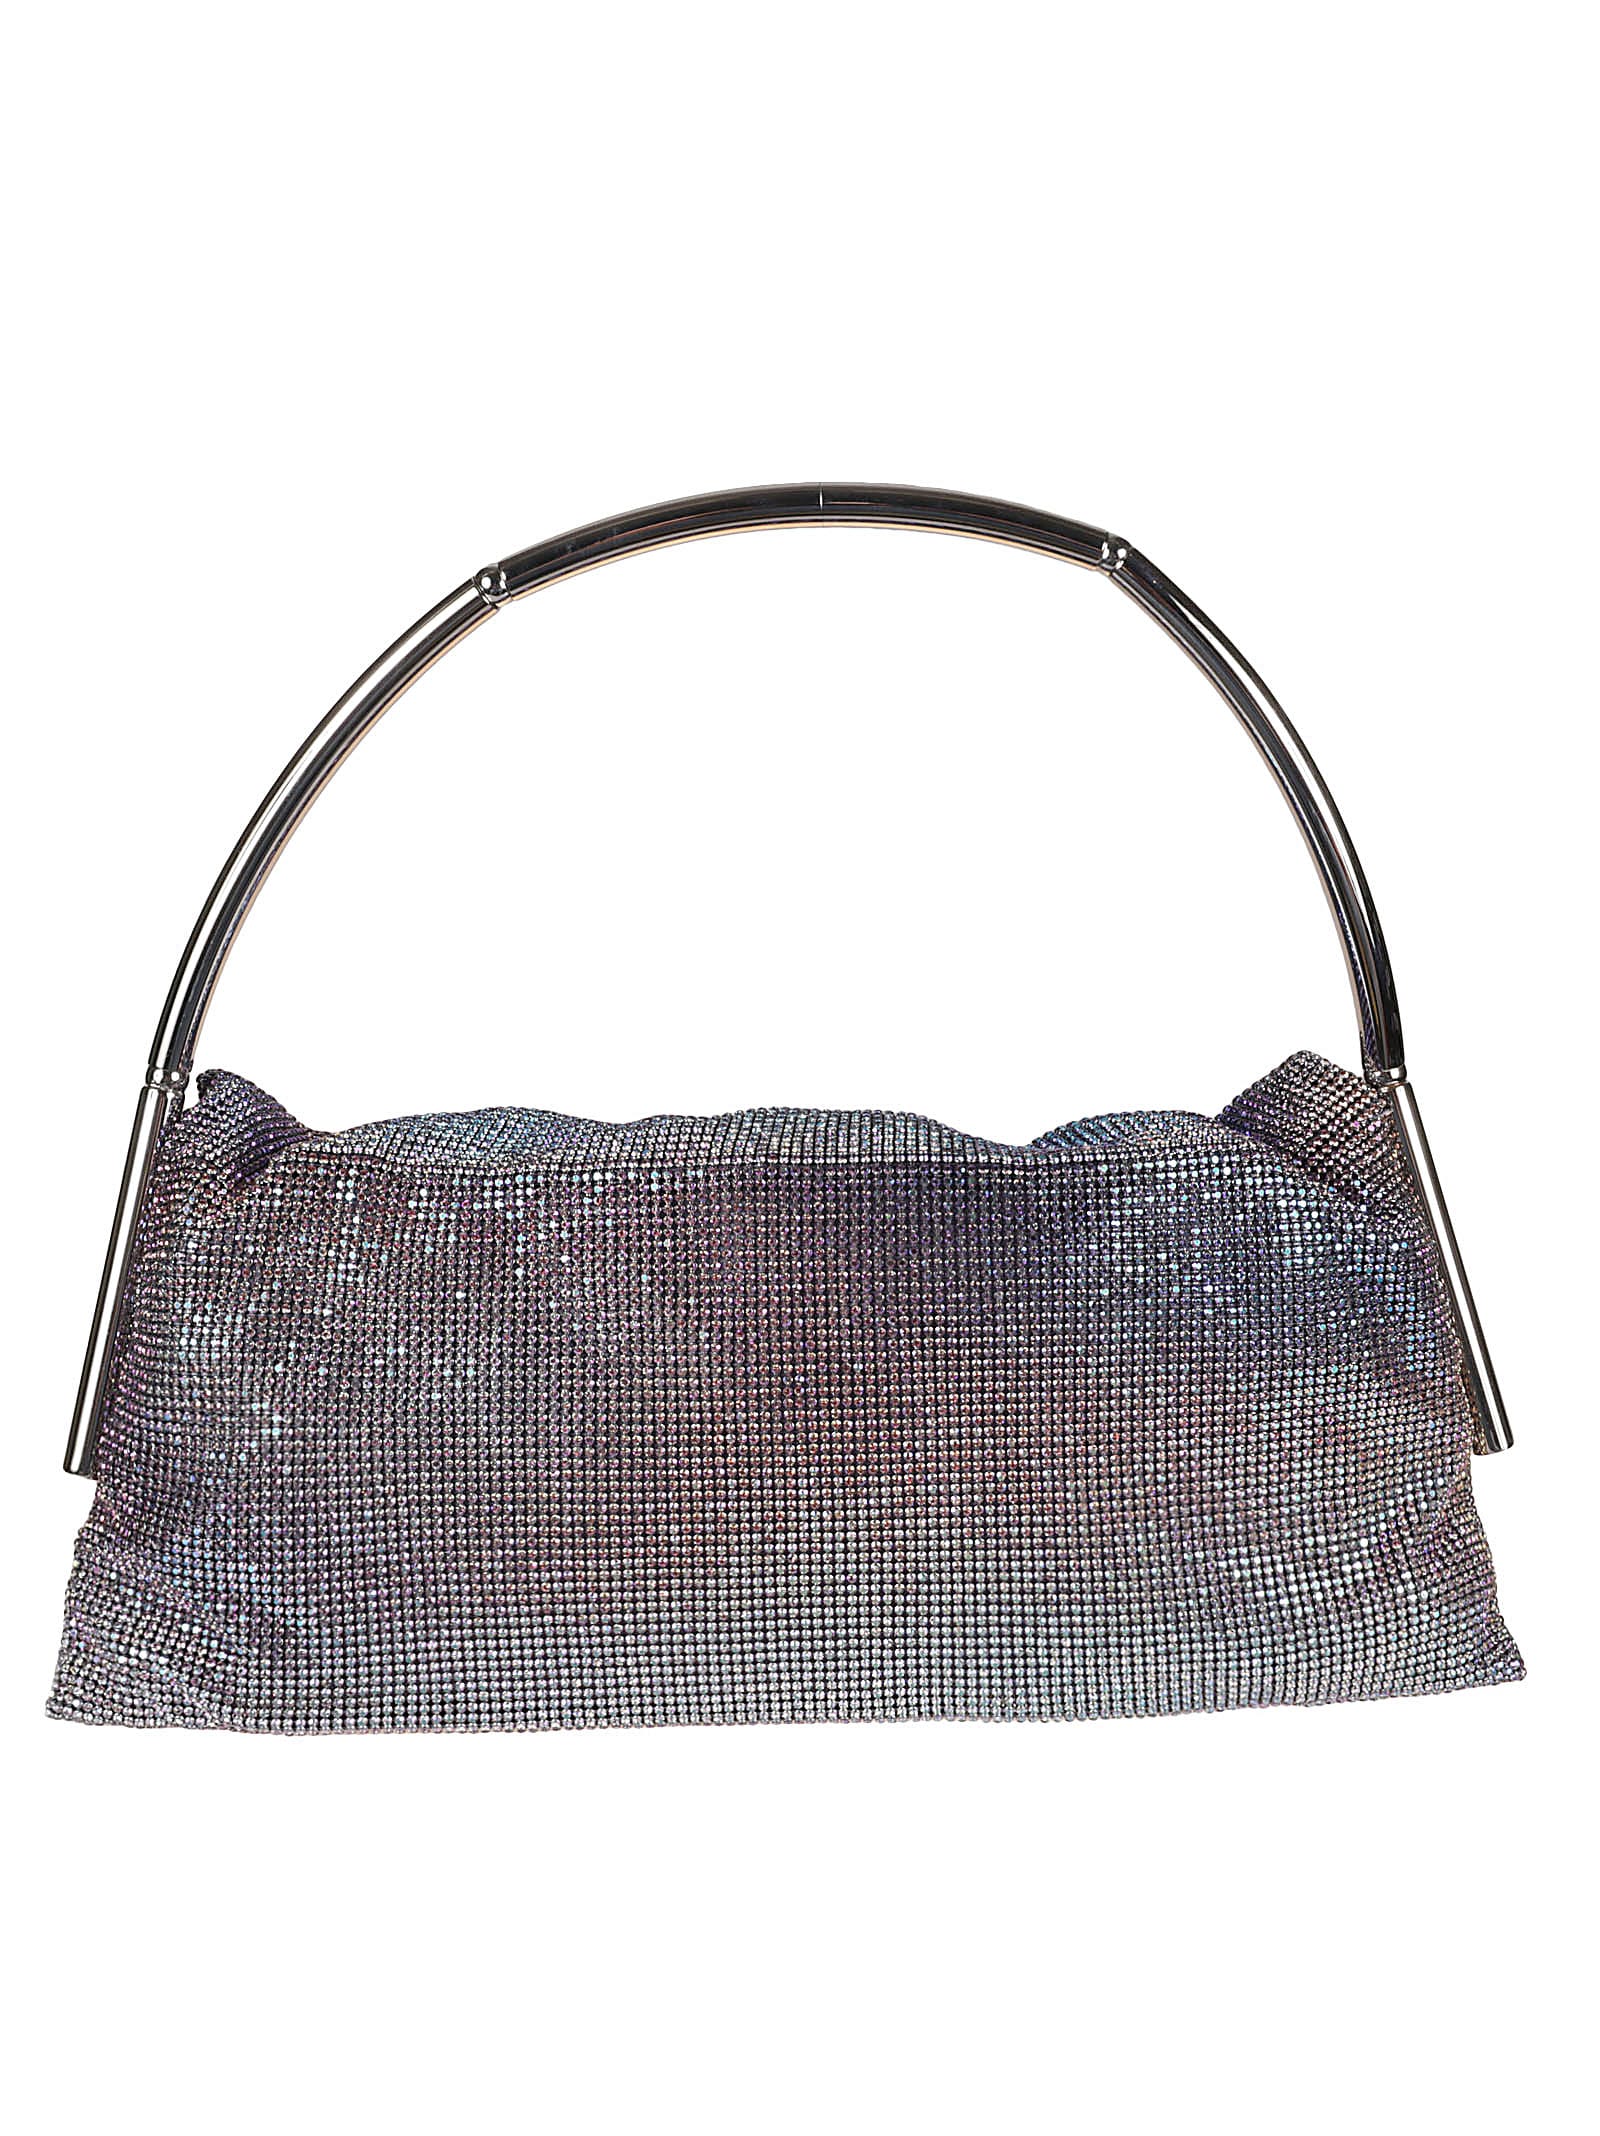 Shop Benedetta Bruzziches Metallic Handle Embellished All-over Tote In Spectre